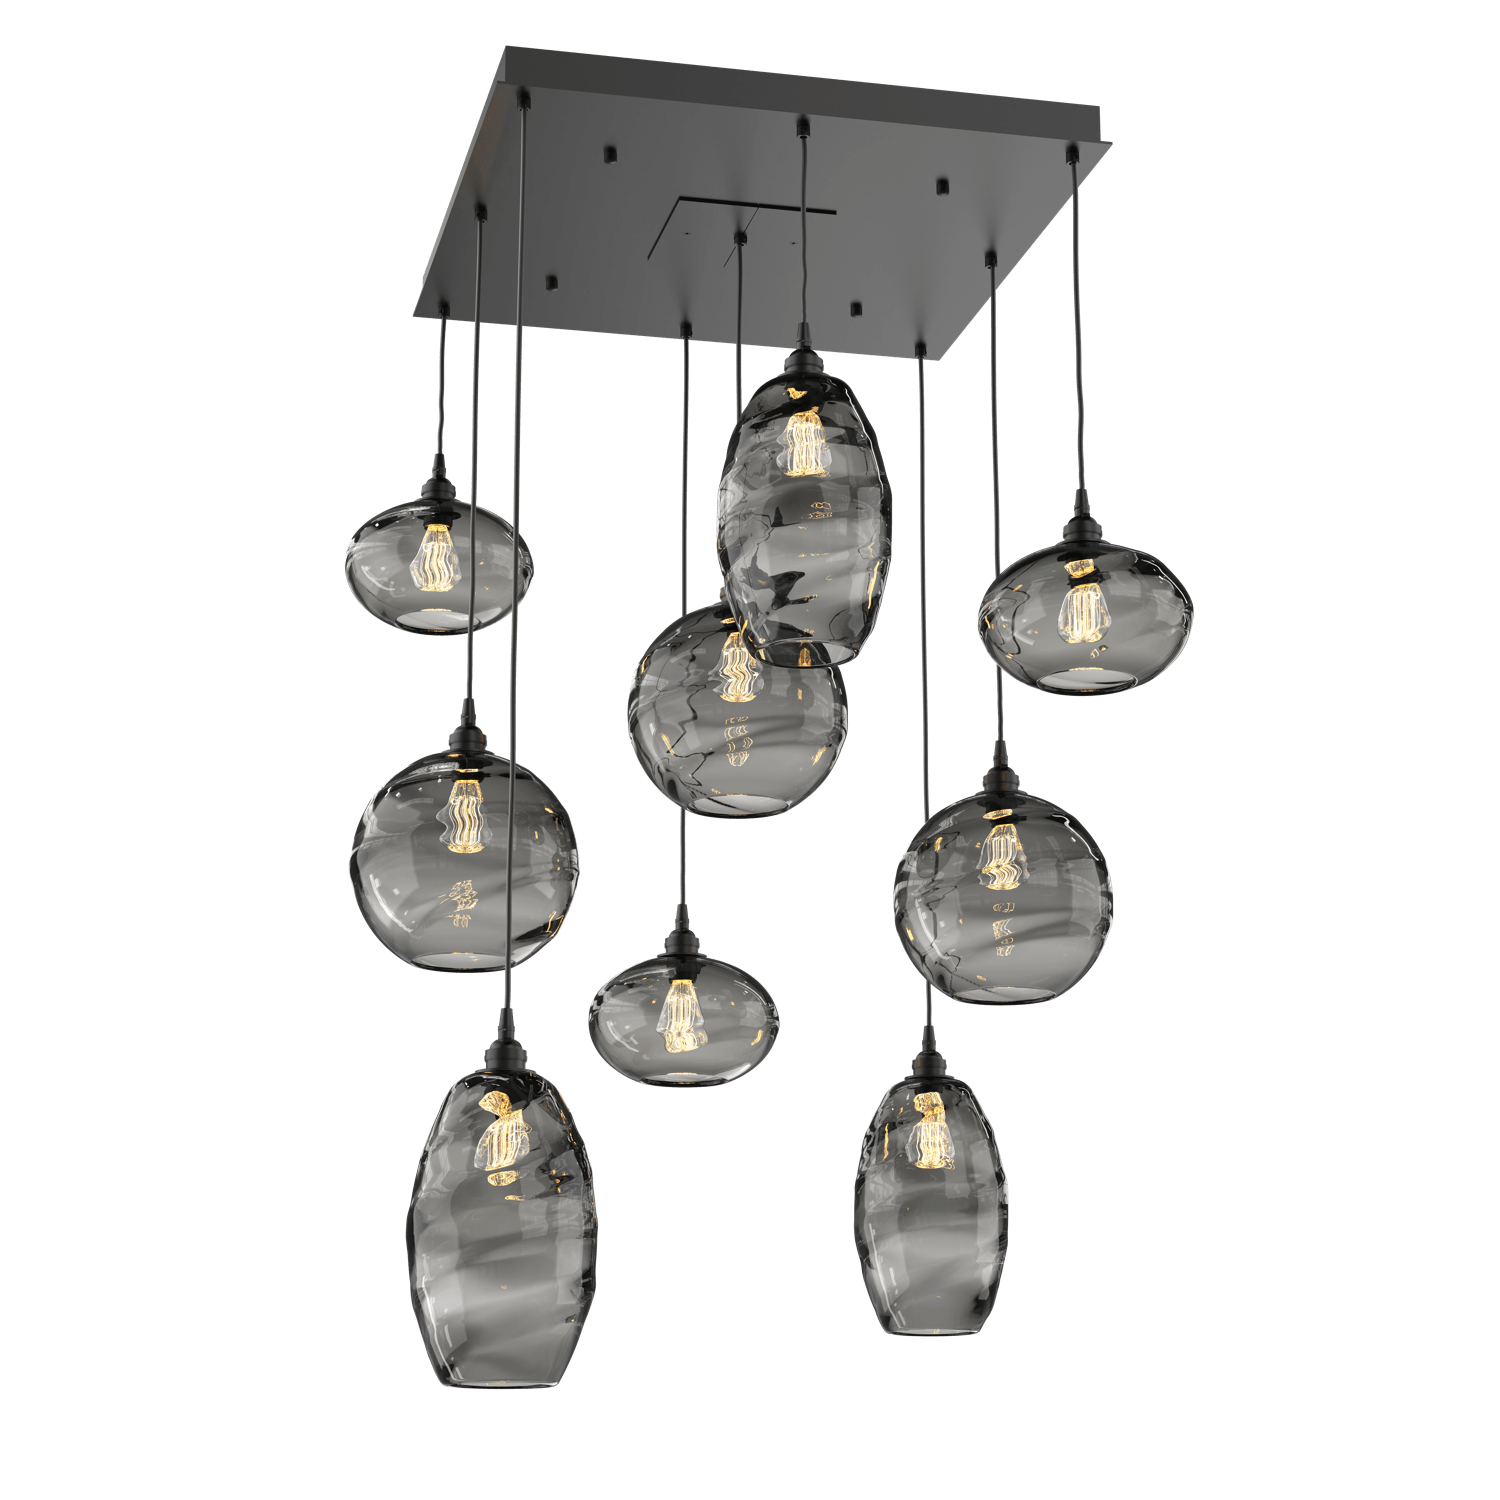 CHB0048-09-MB-OS-Hammerton-Studio-Optic-Blown-Glass-Misto-9-light-square-pendant-chandelier-with-matte-black-finish-and-optic-smoke-blown-glass-shades-and-incandescent-lamping